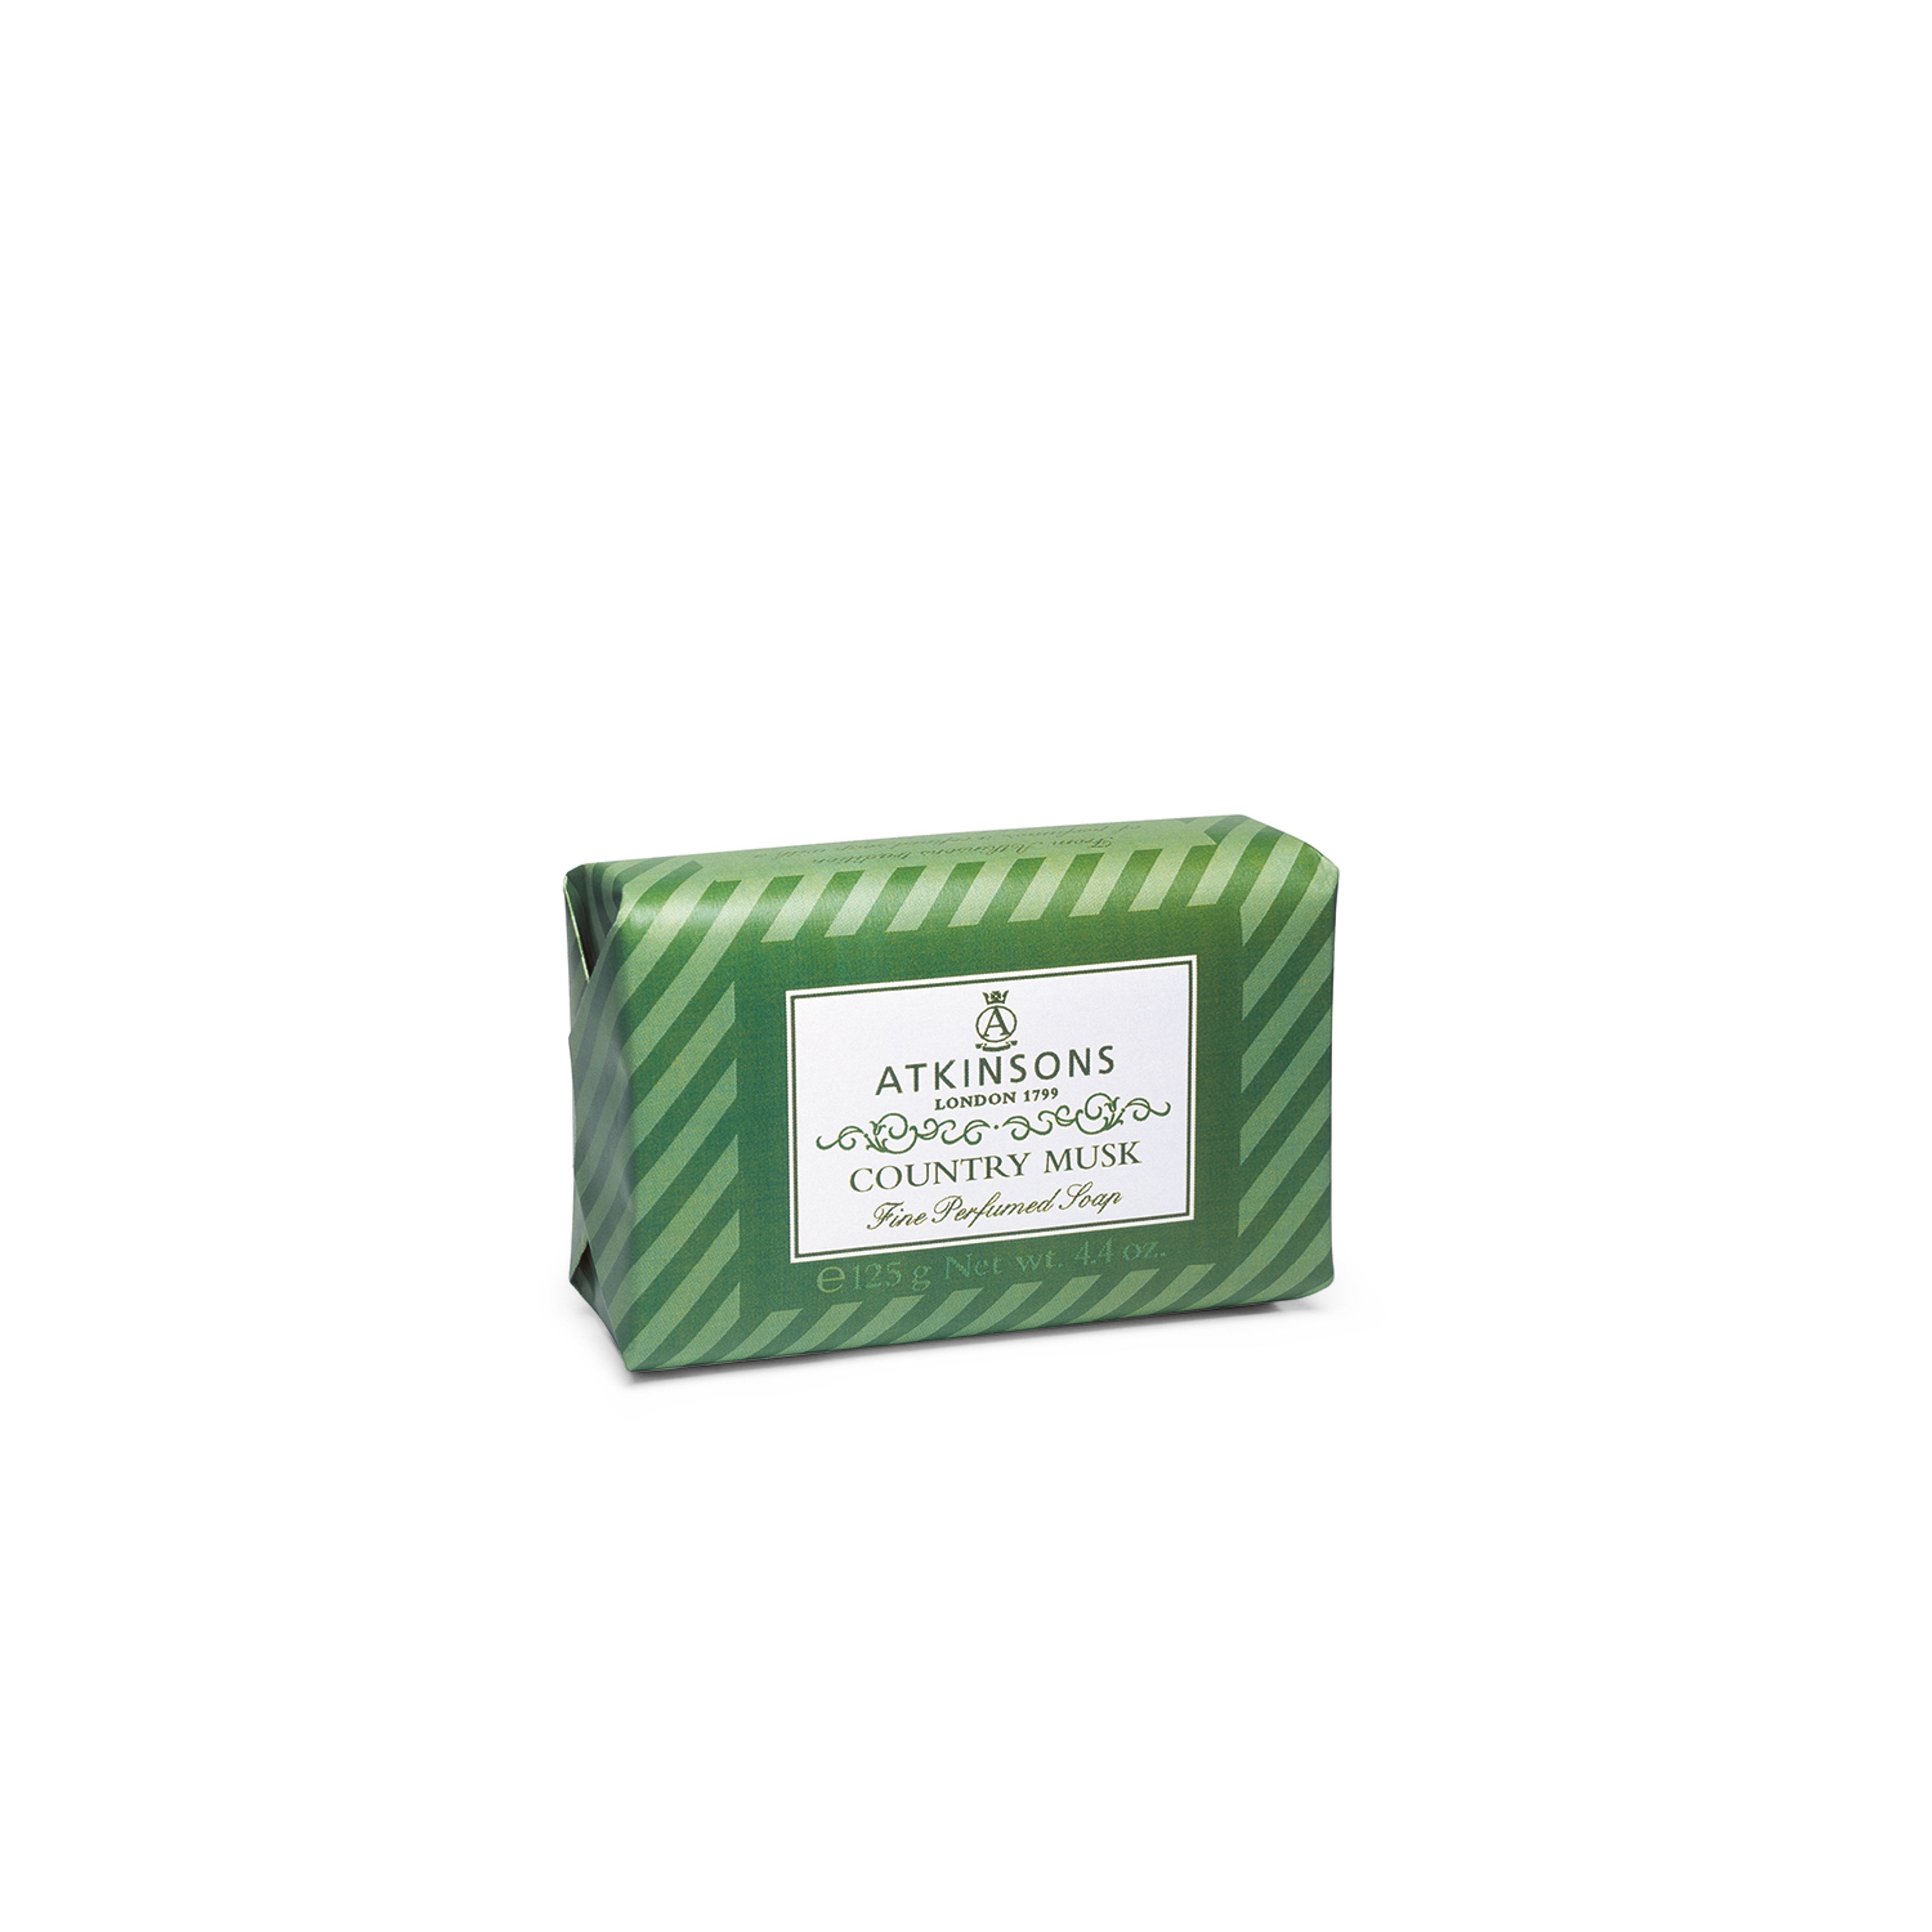 Atkinsons Fine Perfumed Soap-country Musk 1